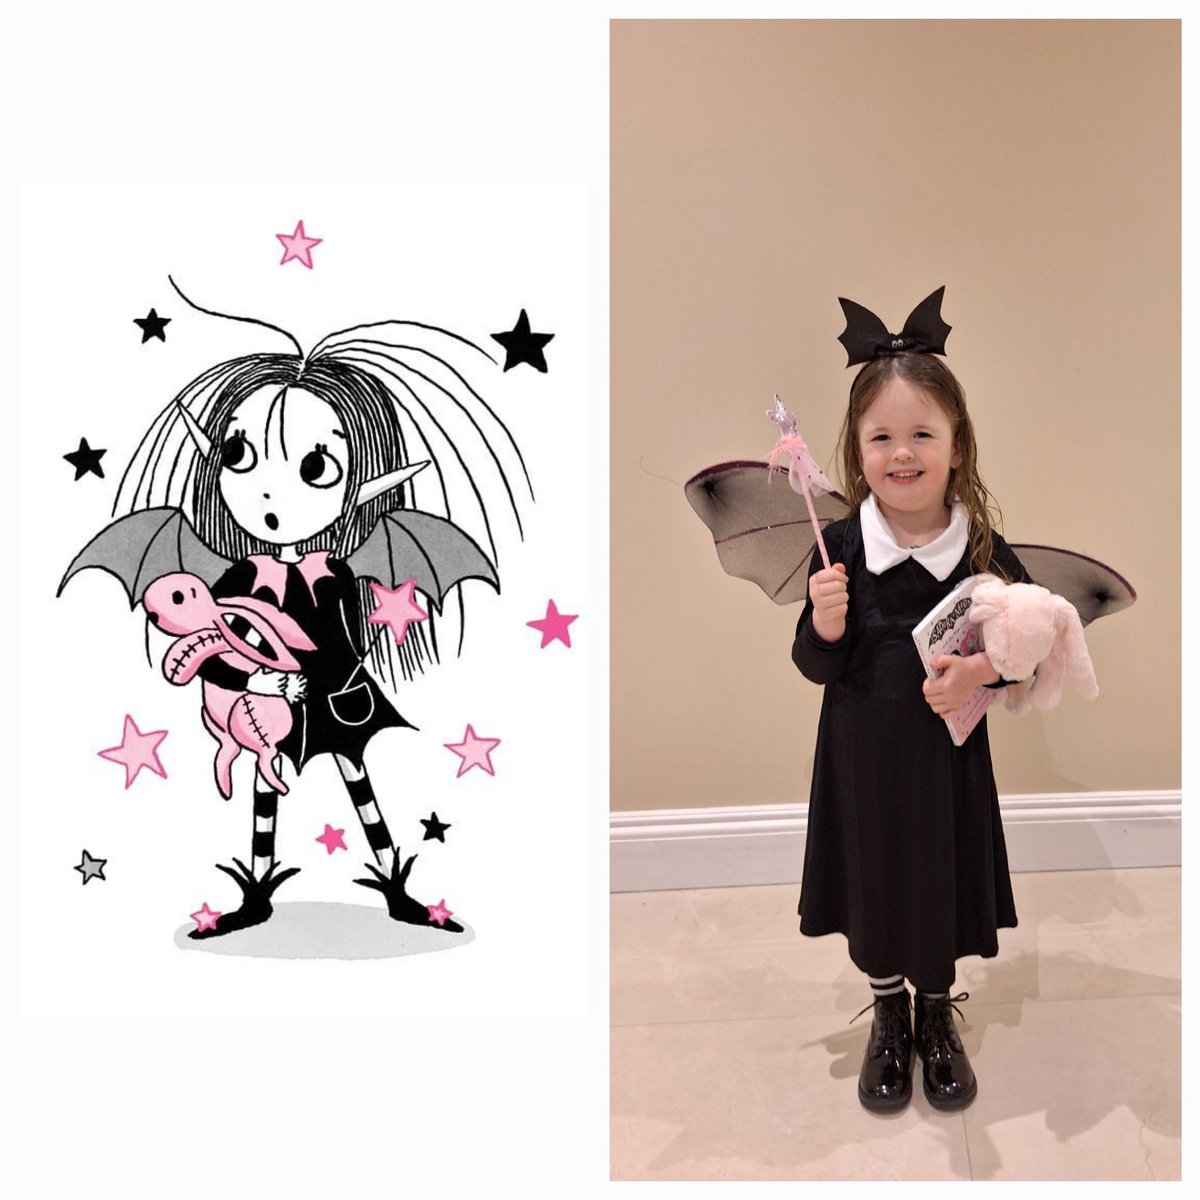 @H_Muncaster our own Isadora Moon for #WorldBookDay 🧛‍♀️🧚‍♀️